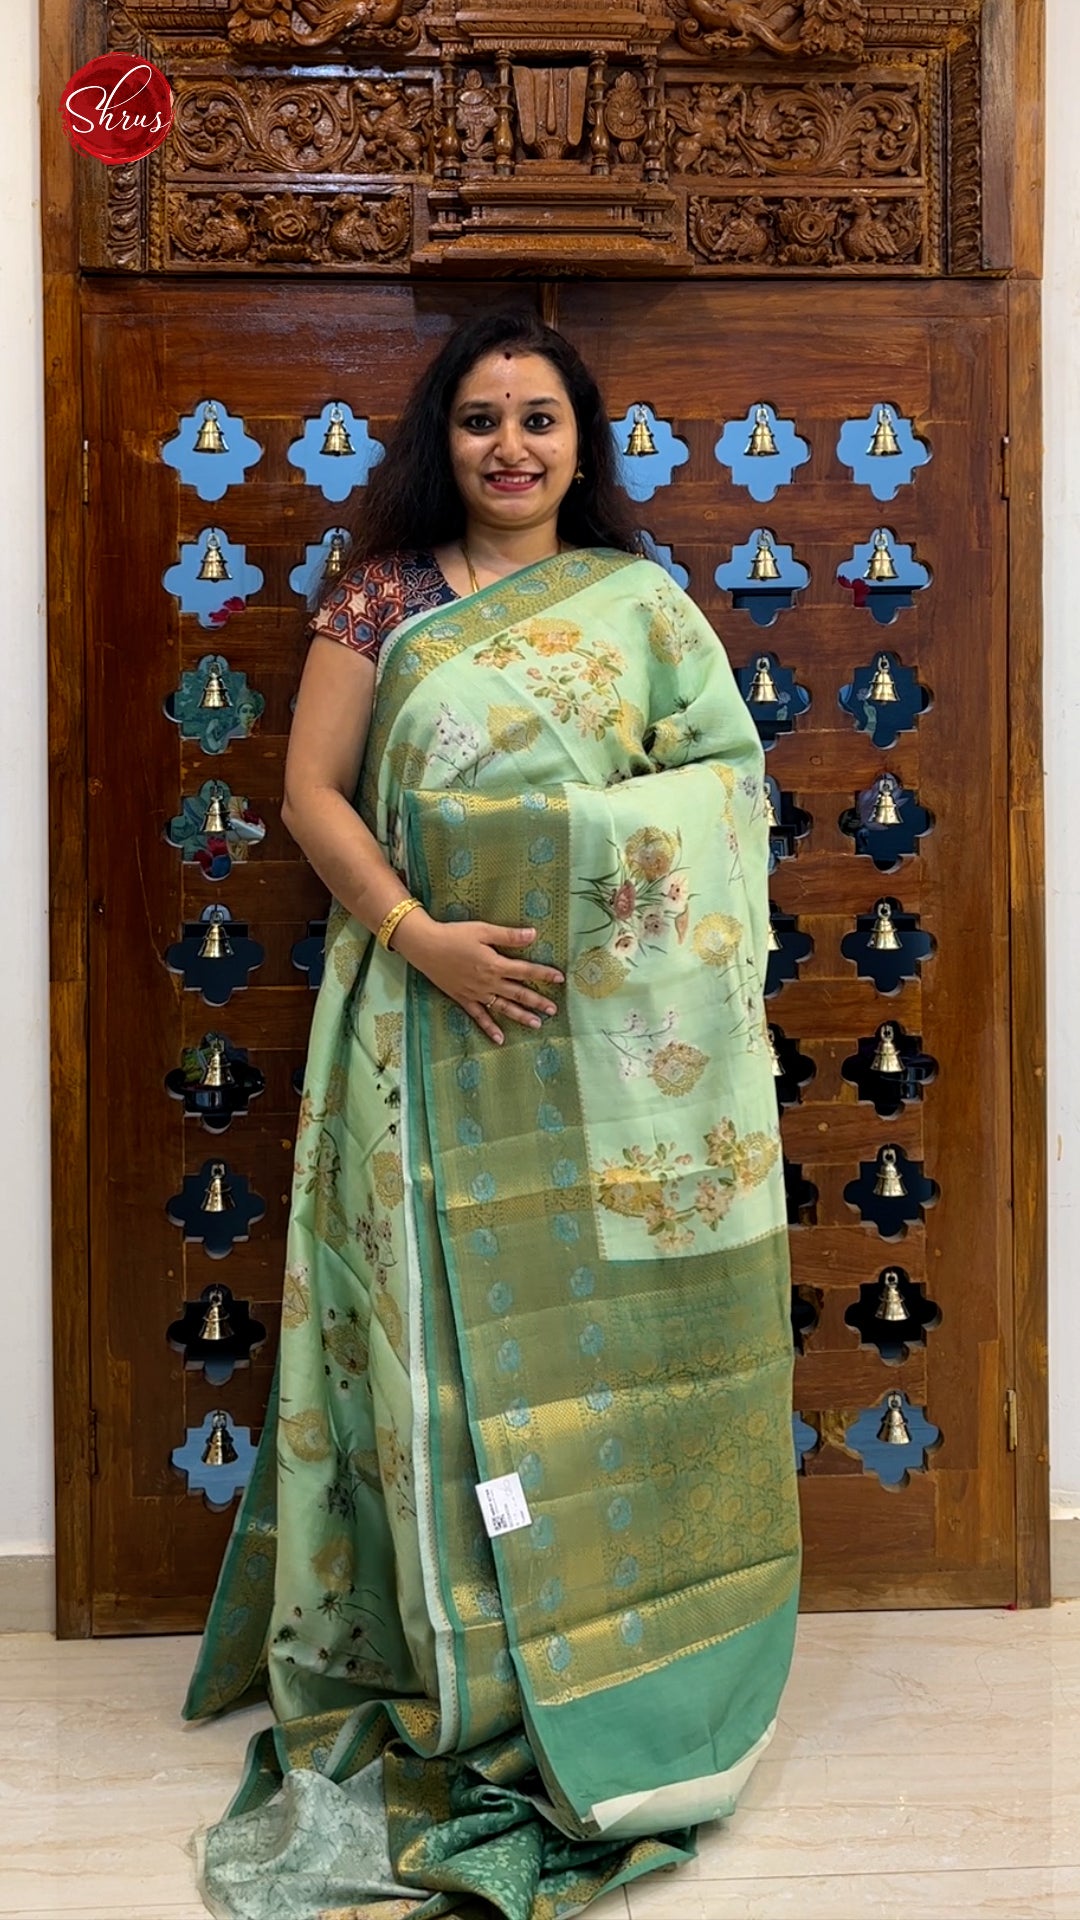 Pale green and Green -Tussar with zari woven floral motifs  on the body &   Zari Border - Shop on ShrusEternity.com